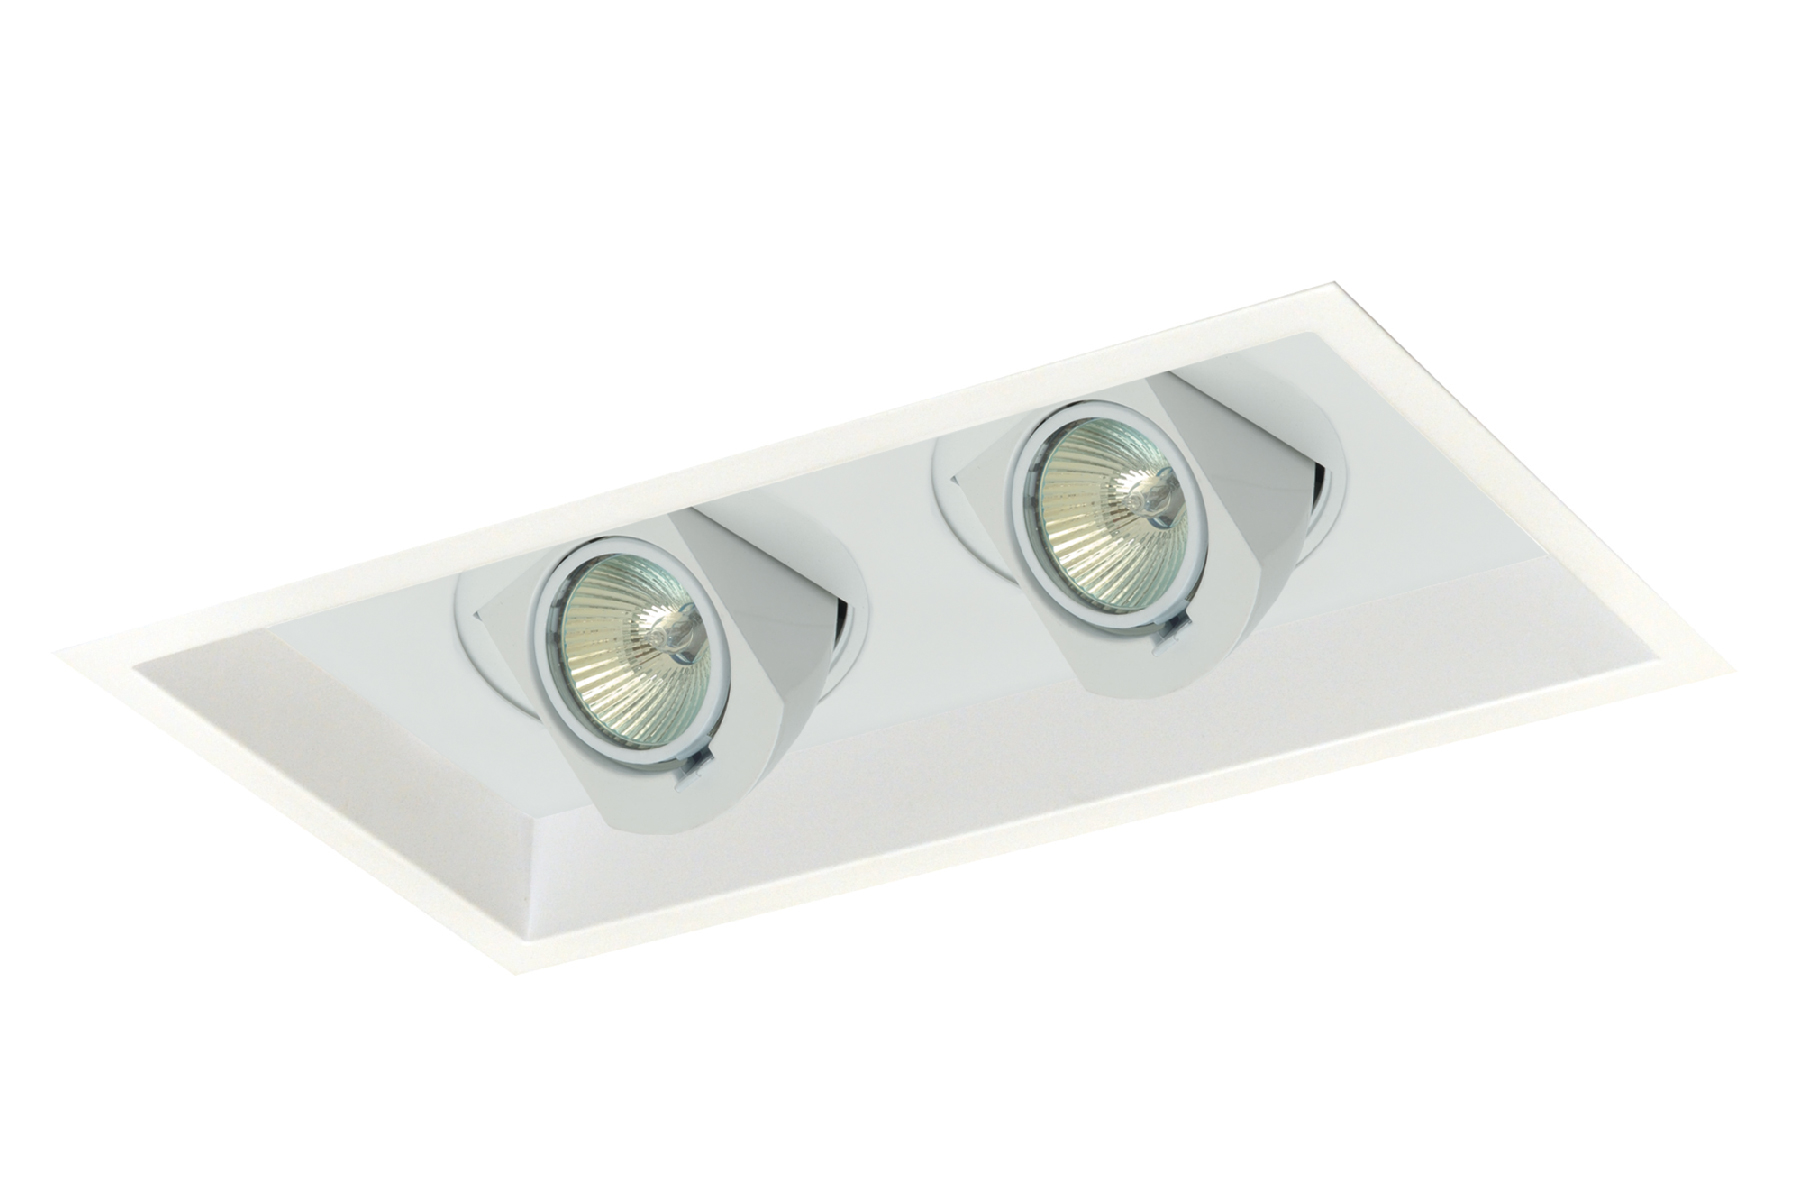 Alcon Lighting Oculare 14019-2 Adjustable Pull Down Multiple LED Dimmable Recessed Rectangular Light